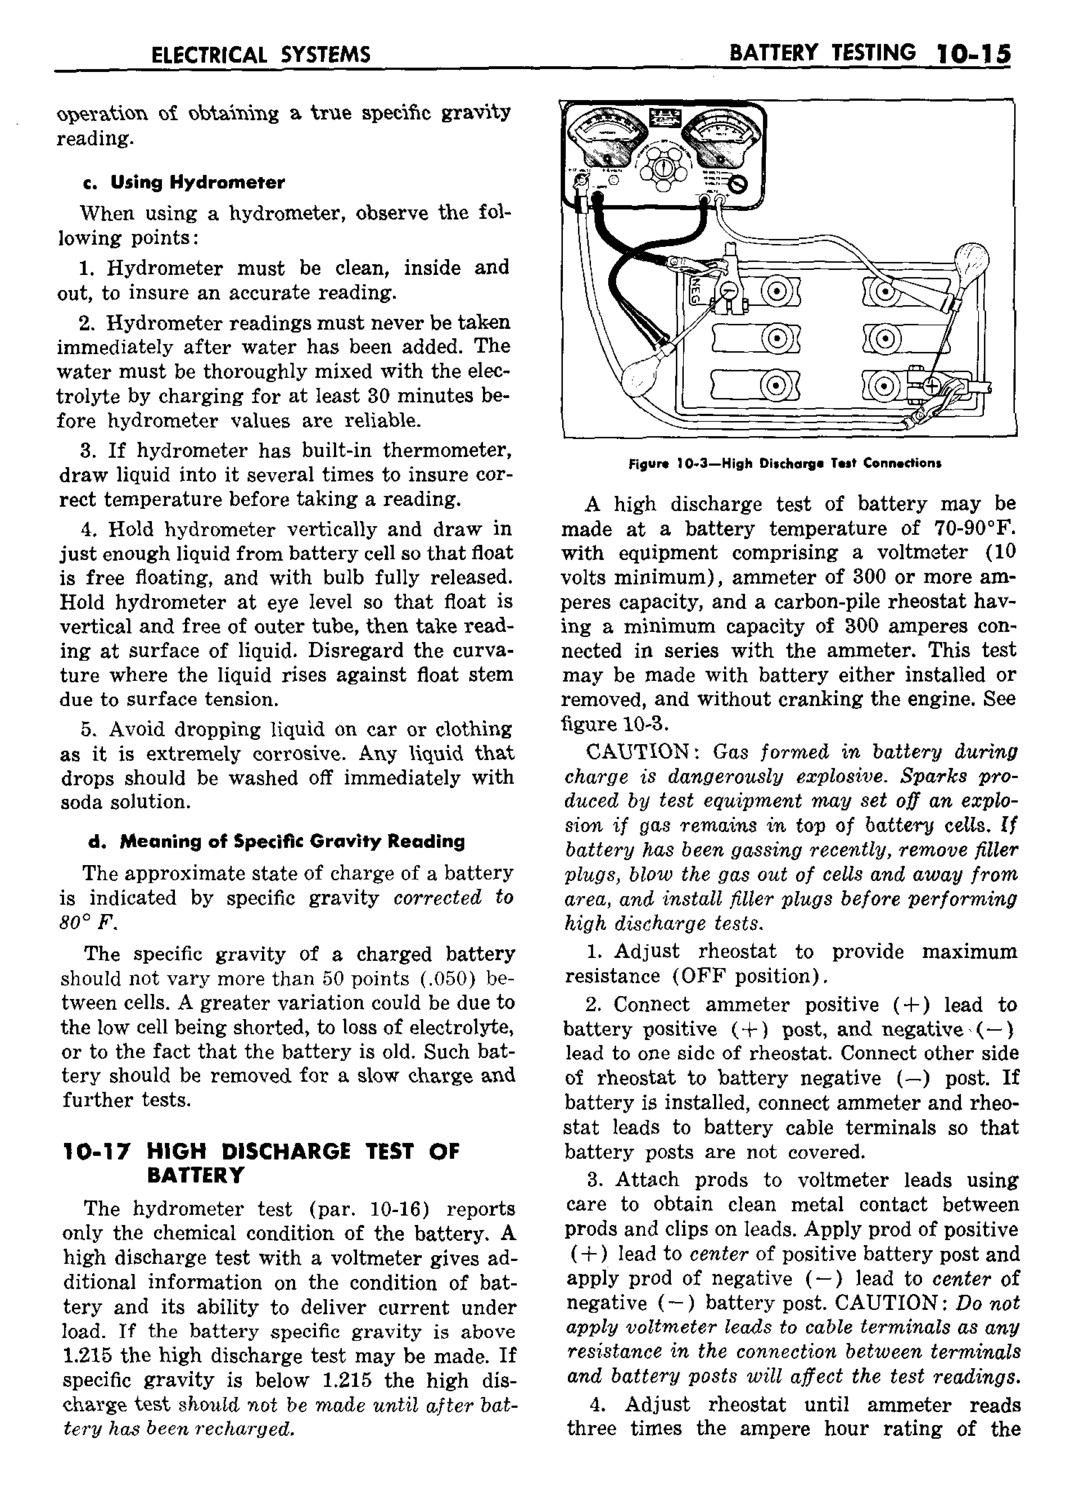 n_11 1959 Buick Shop Manual - Electrical Systems-015-015.jpg